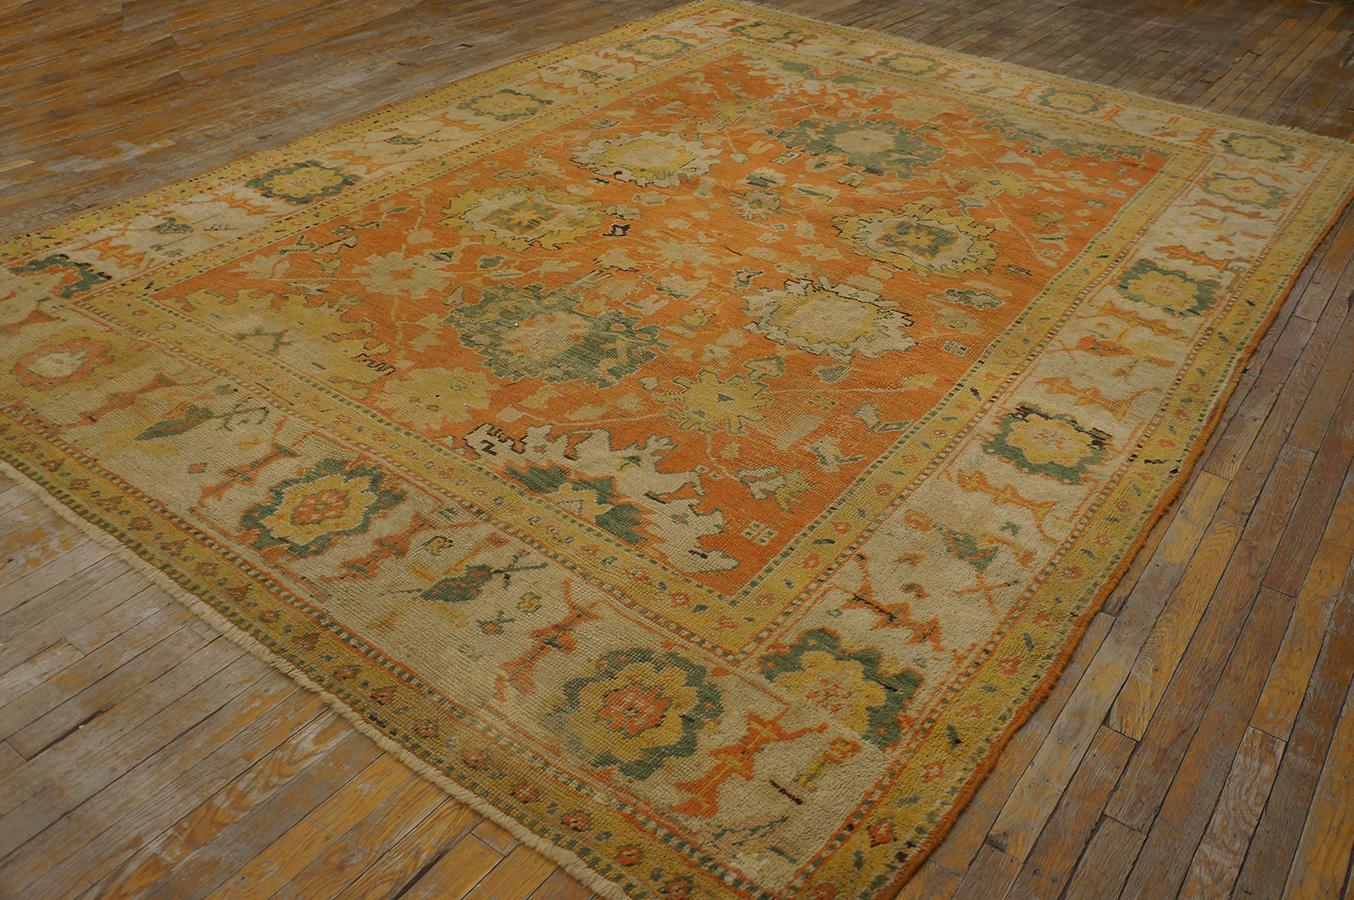 Hand-Knotted Late 19th Century Turkish Anatolian Oushak Carpet (8'4''x 11'2'' - 254 x 340 cm) For Sale